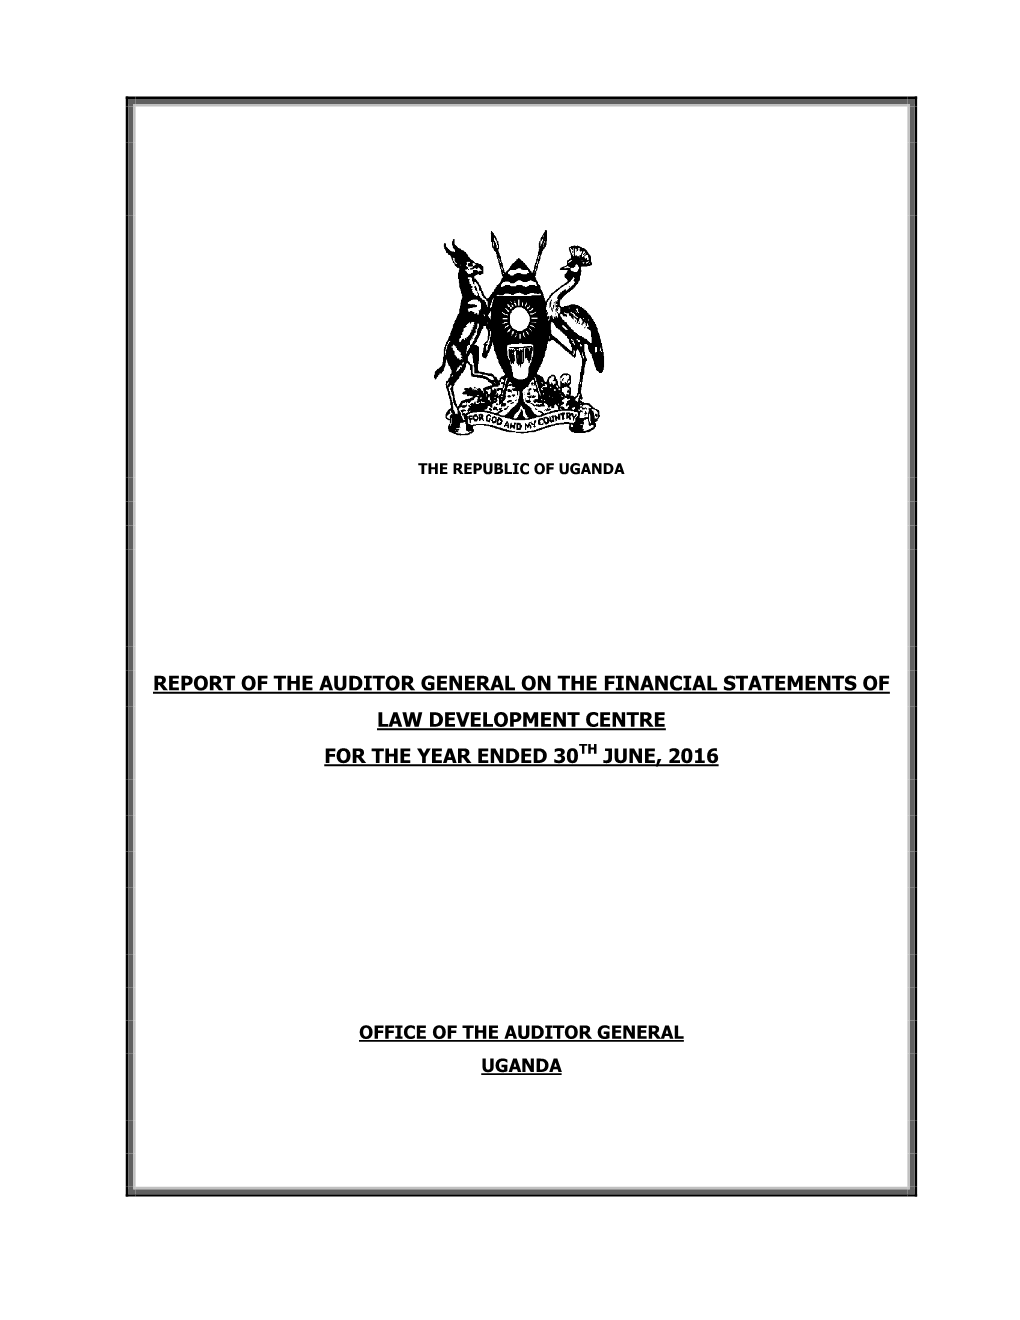 Report of the Auditor General on the Financial Statements of Law Development Centre for the Year Ended 30Th June, 2016